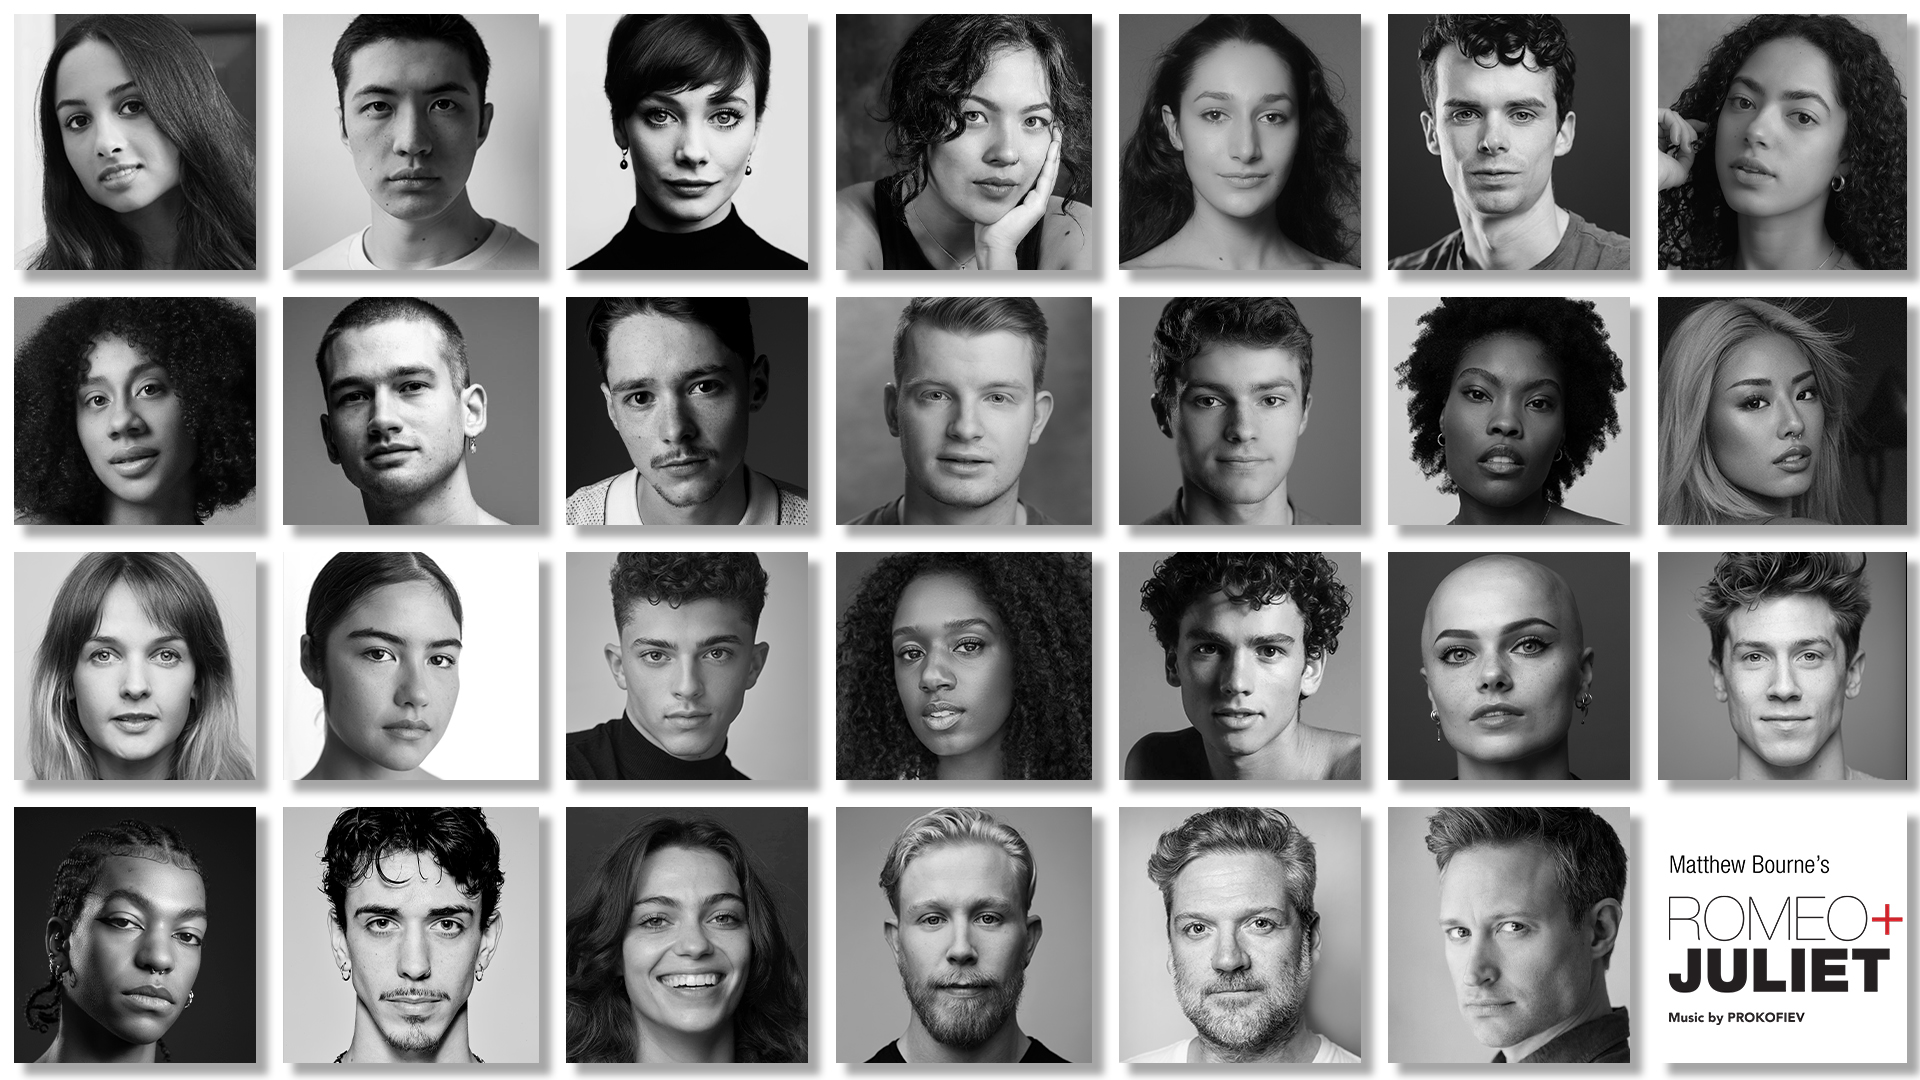 Casting announced for Matthew Bourne's Romeo and Juliet - Curve